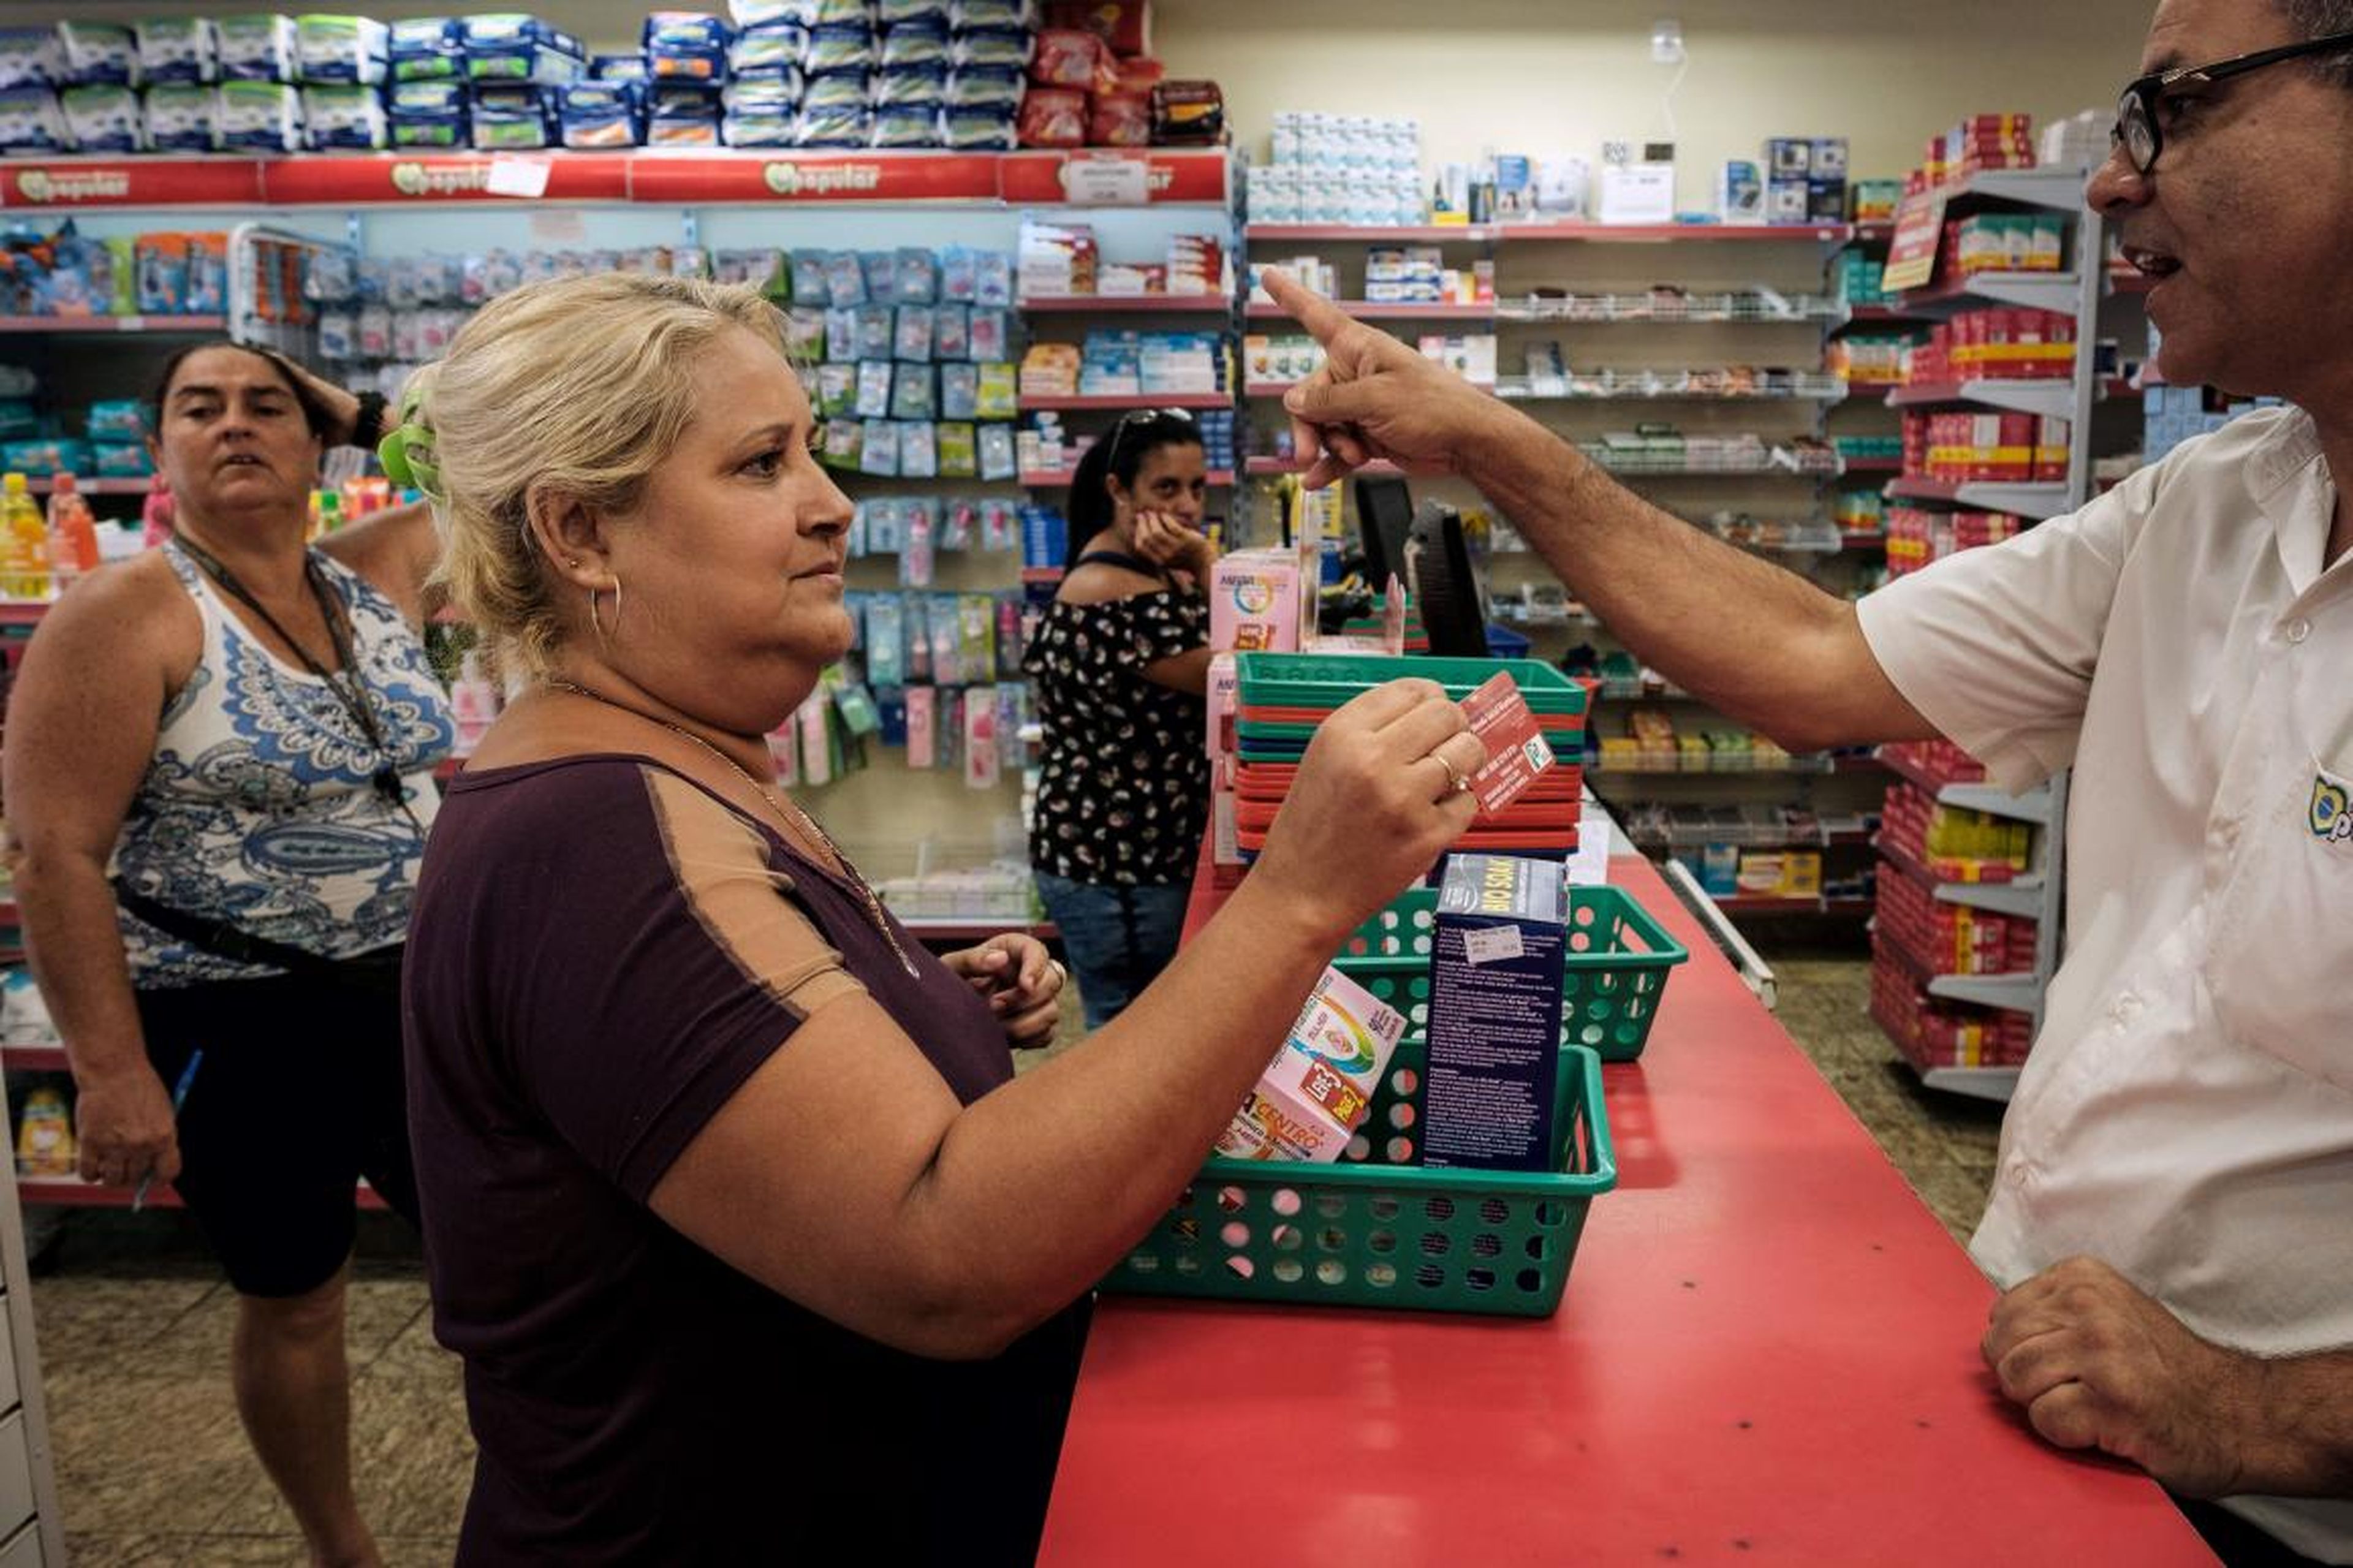 A woman uses her "mumbuca" card at a pharmacy in Marica, Brazil.